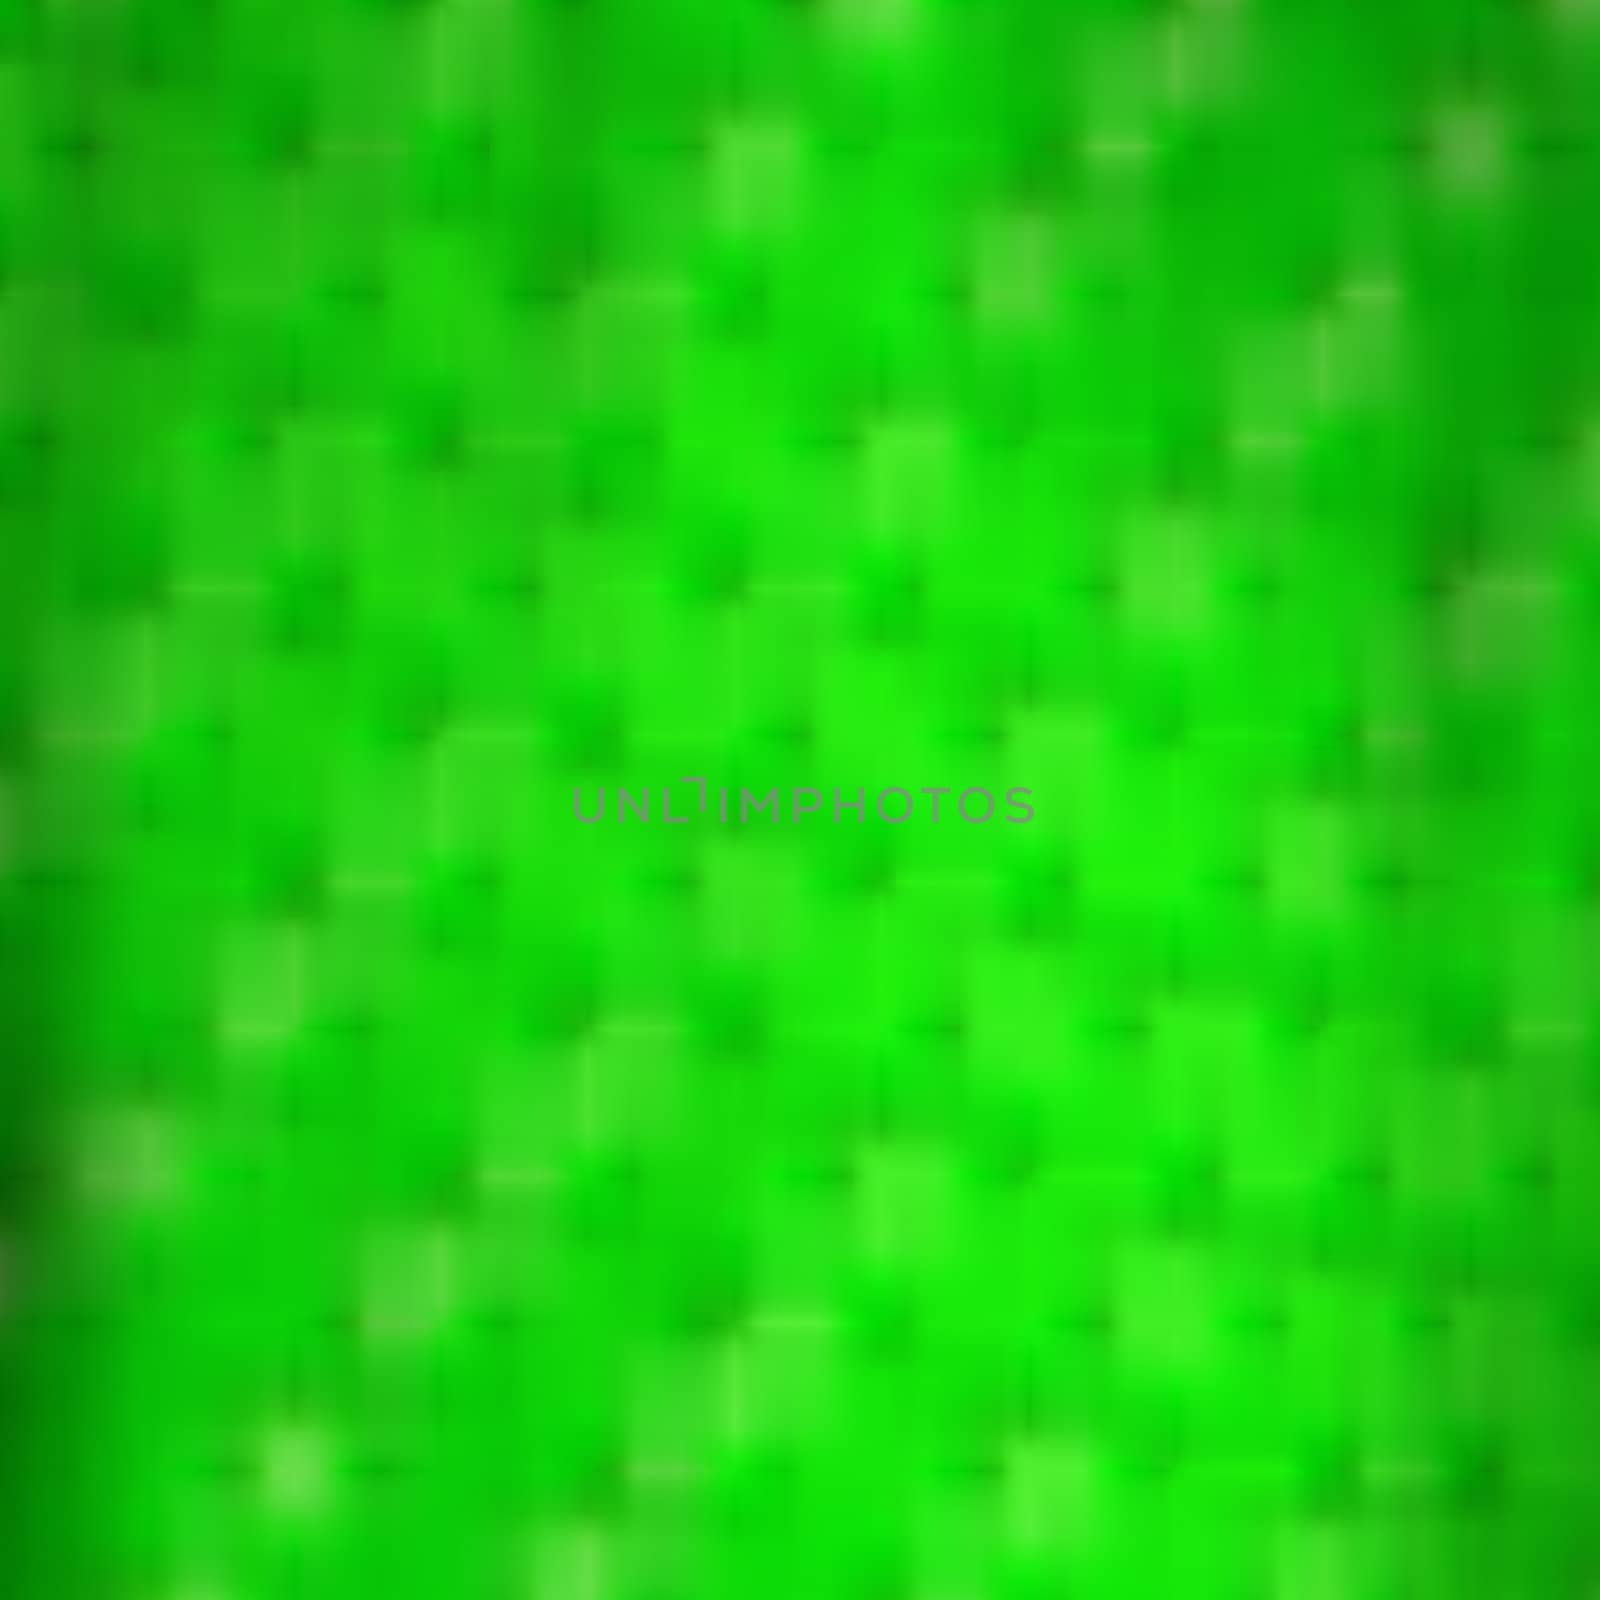 Green square background